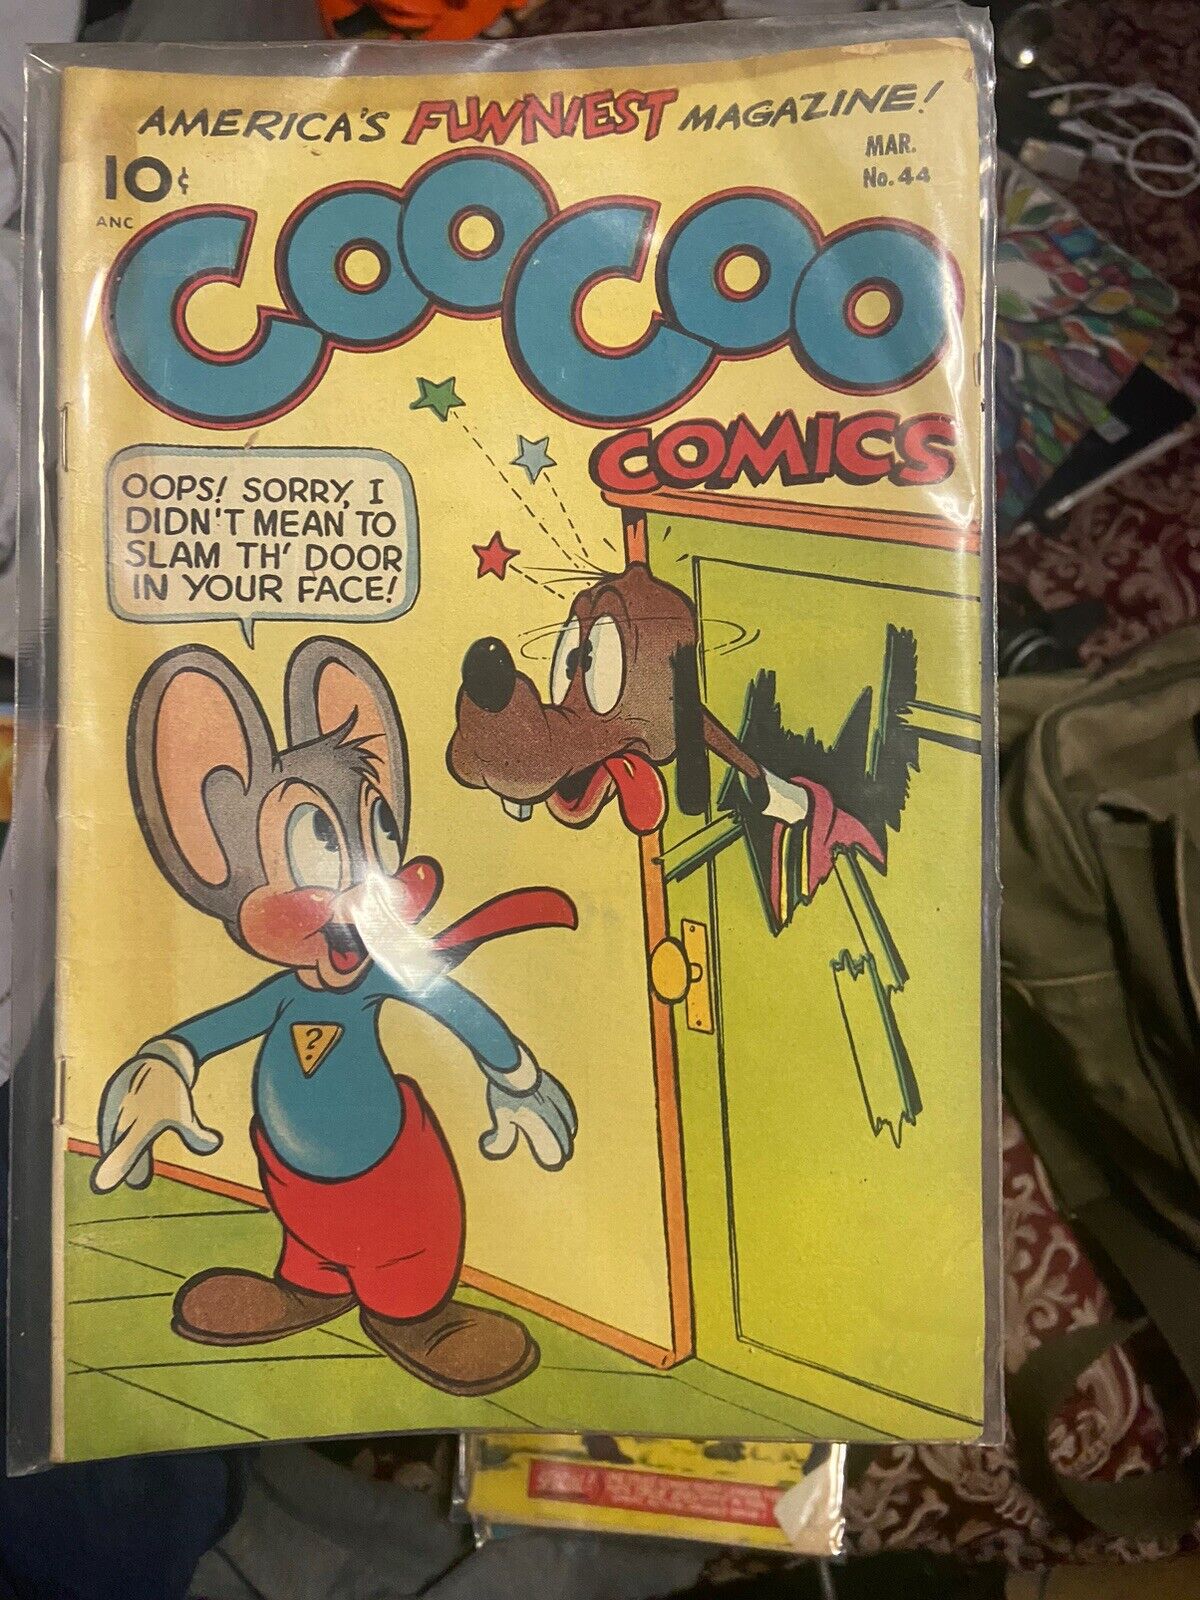 Coo Coo Comics #44 © March 1949 Pines